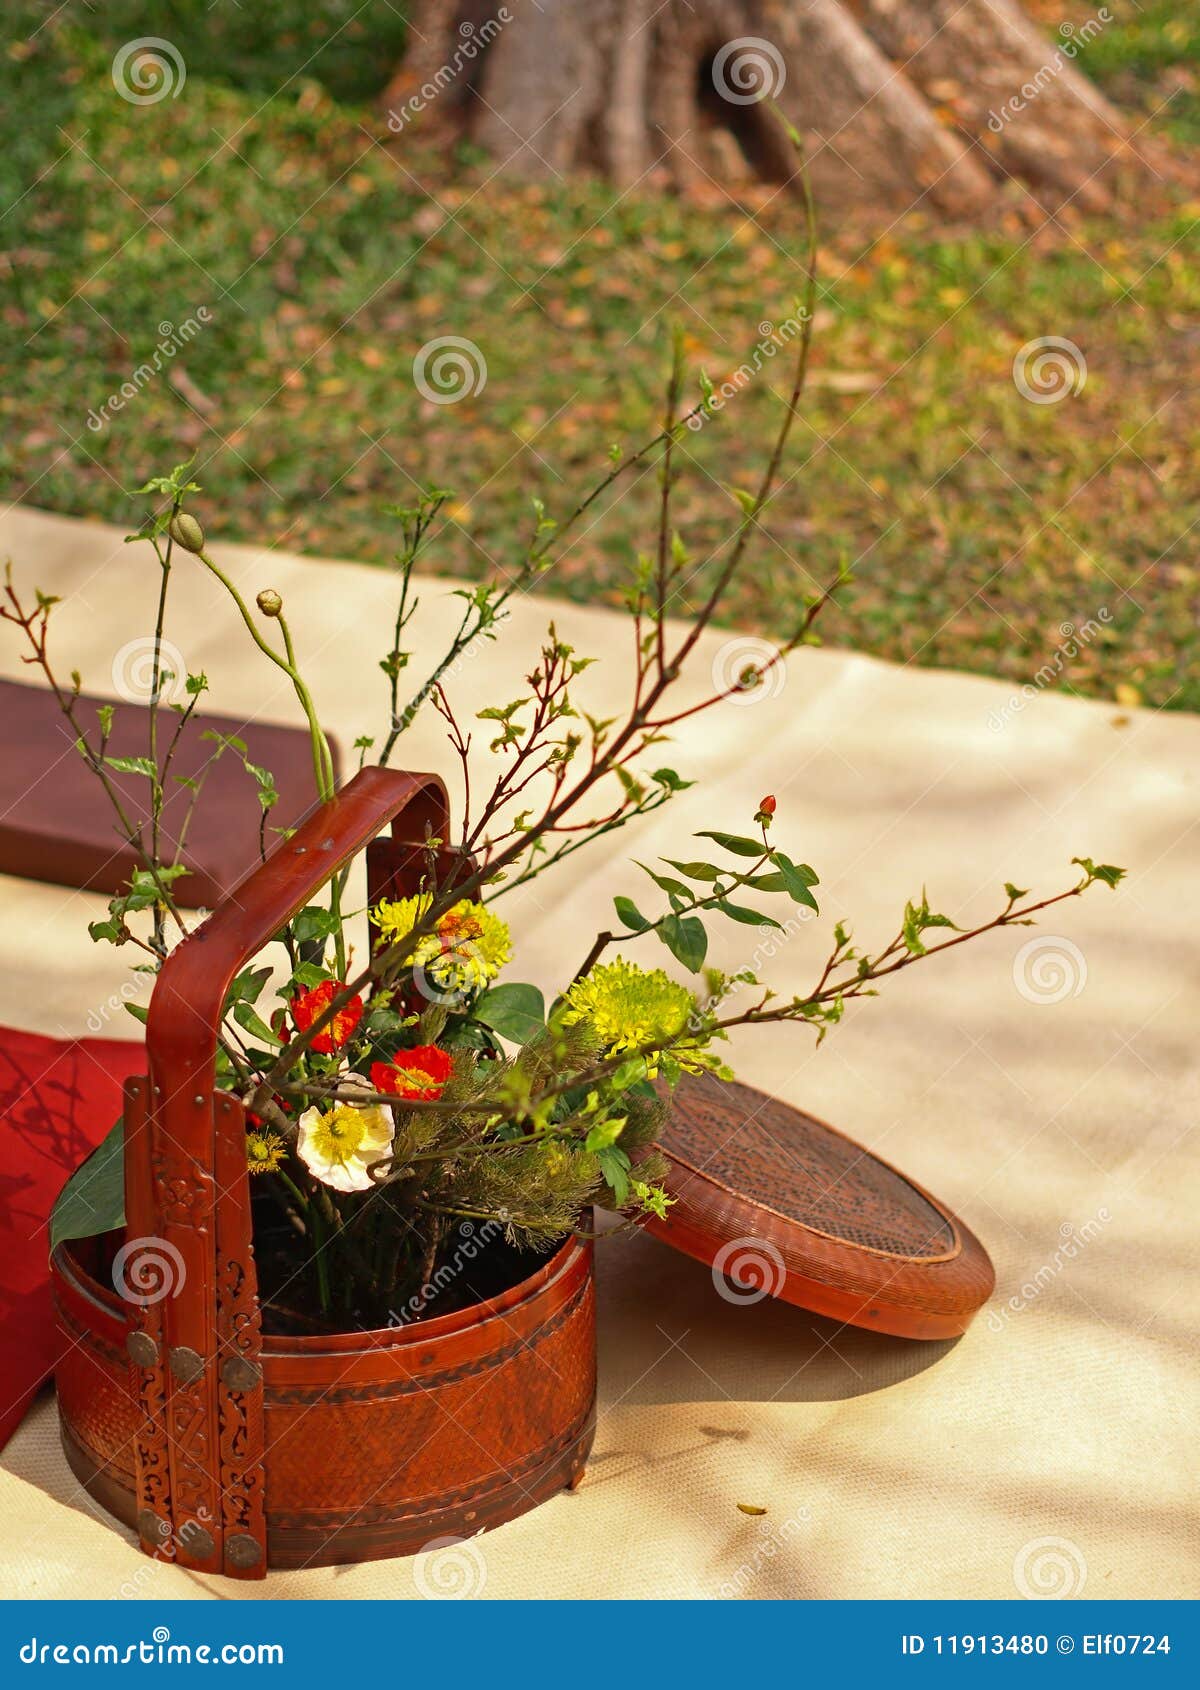 background picture of ikebana